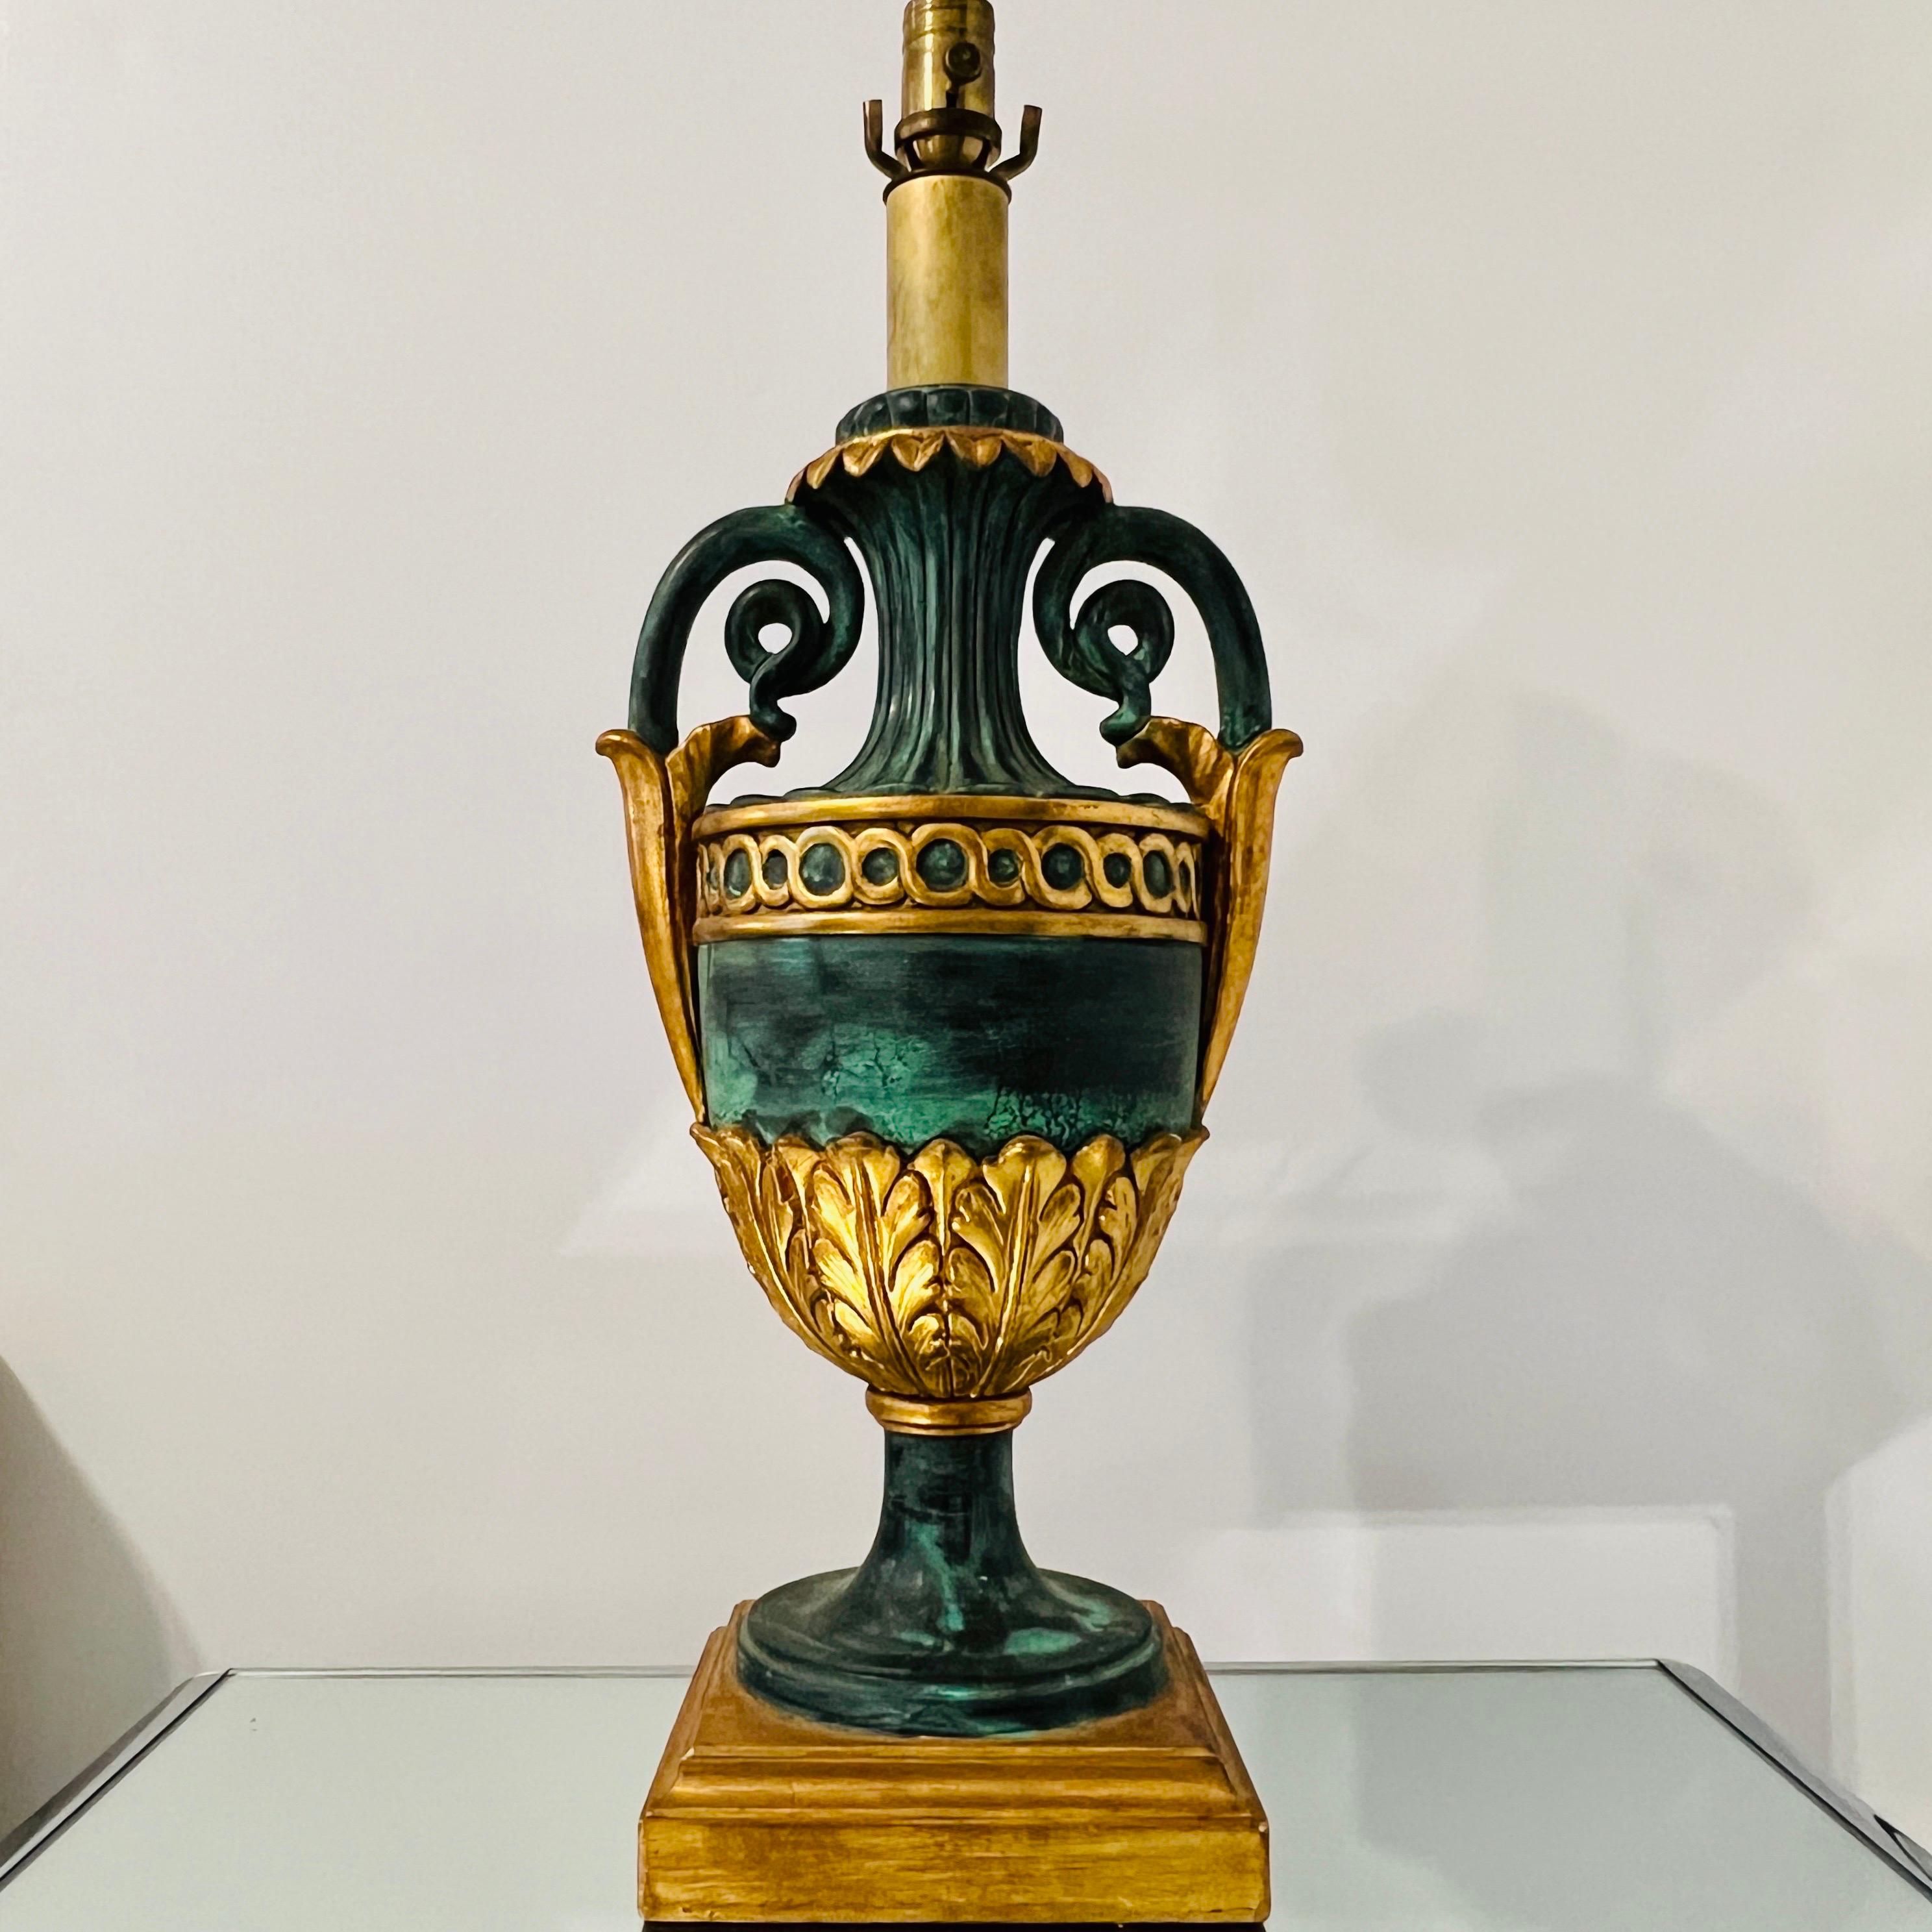 Late 20th Century Neoclassical Urn Lamp in Giltwood and Painted Verdigris, Italy, c. 1970's